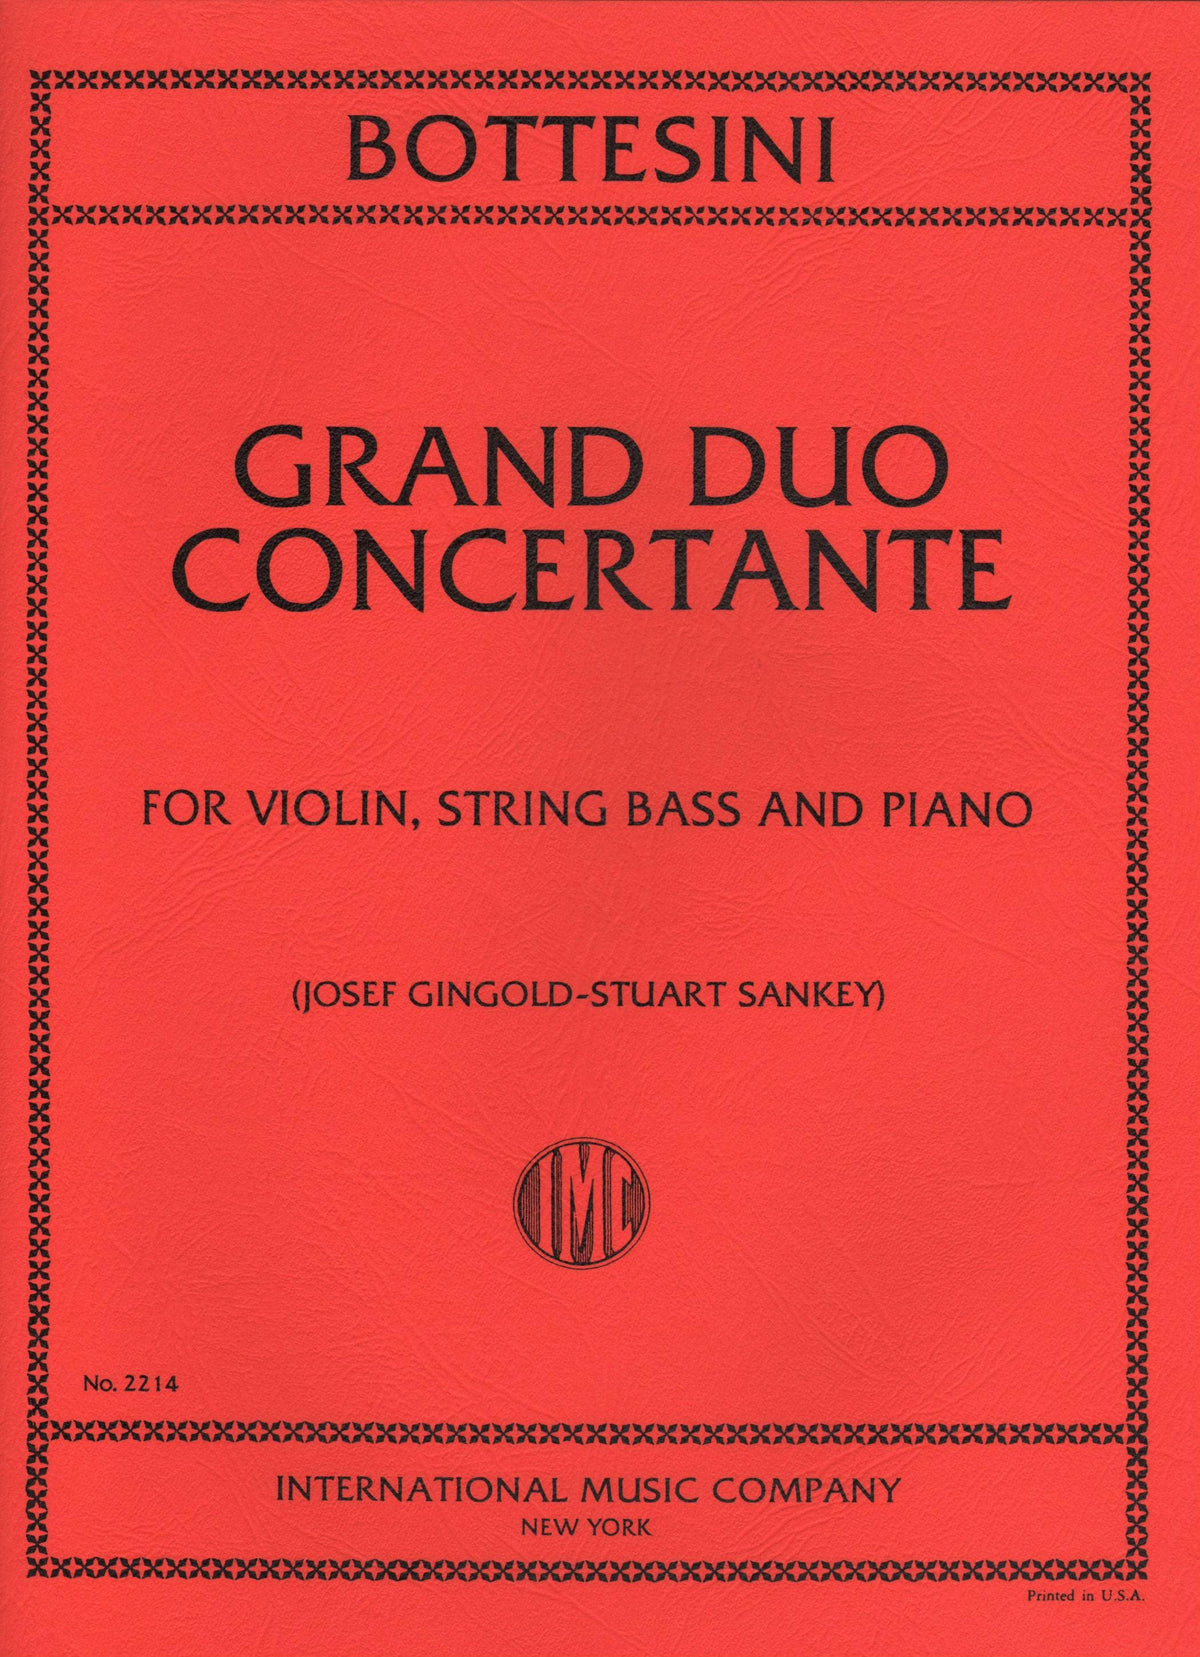 Bottesini, Giovanni - Grand Duo Concertant for Violin, Double Bass and Piano - Arranged by Gingold-Sankey - International Edition